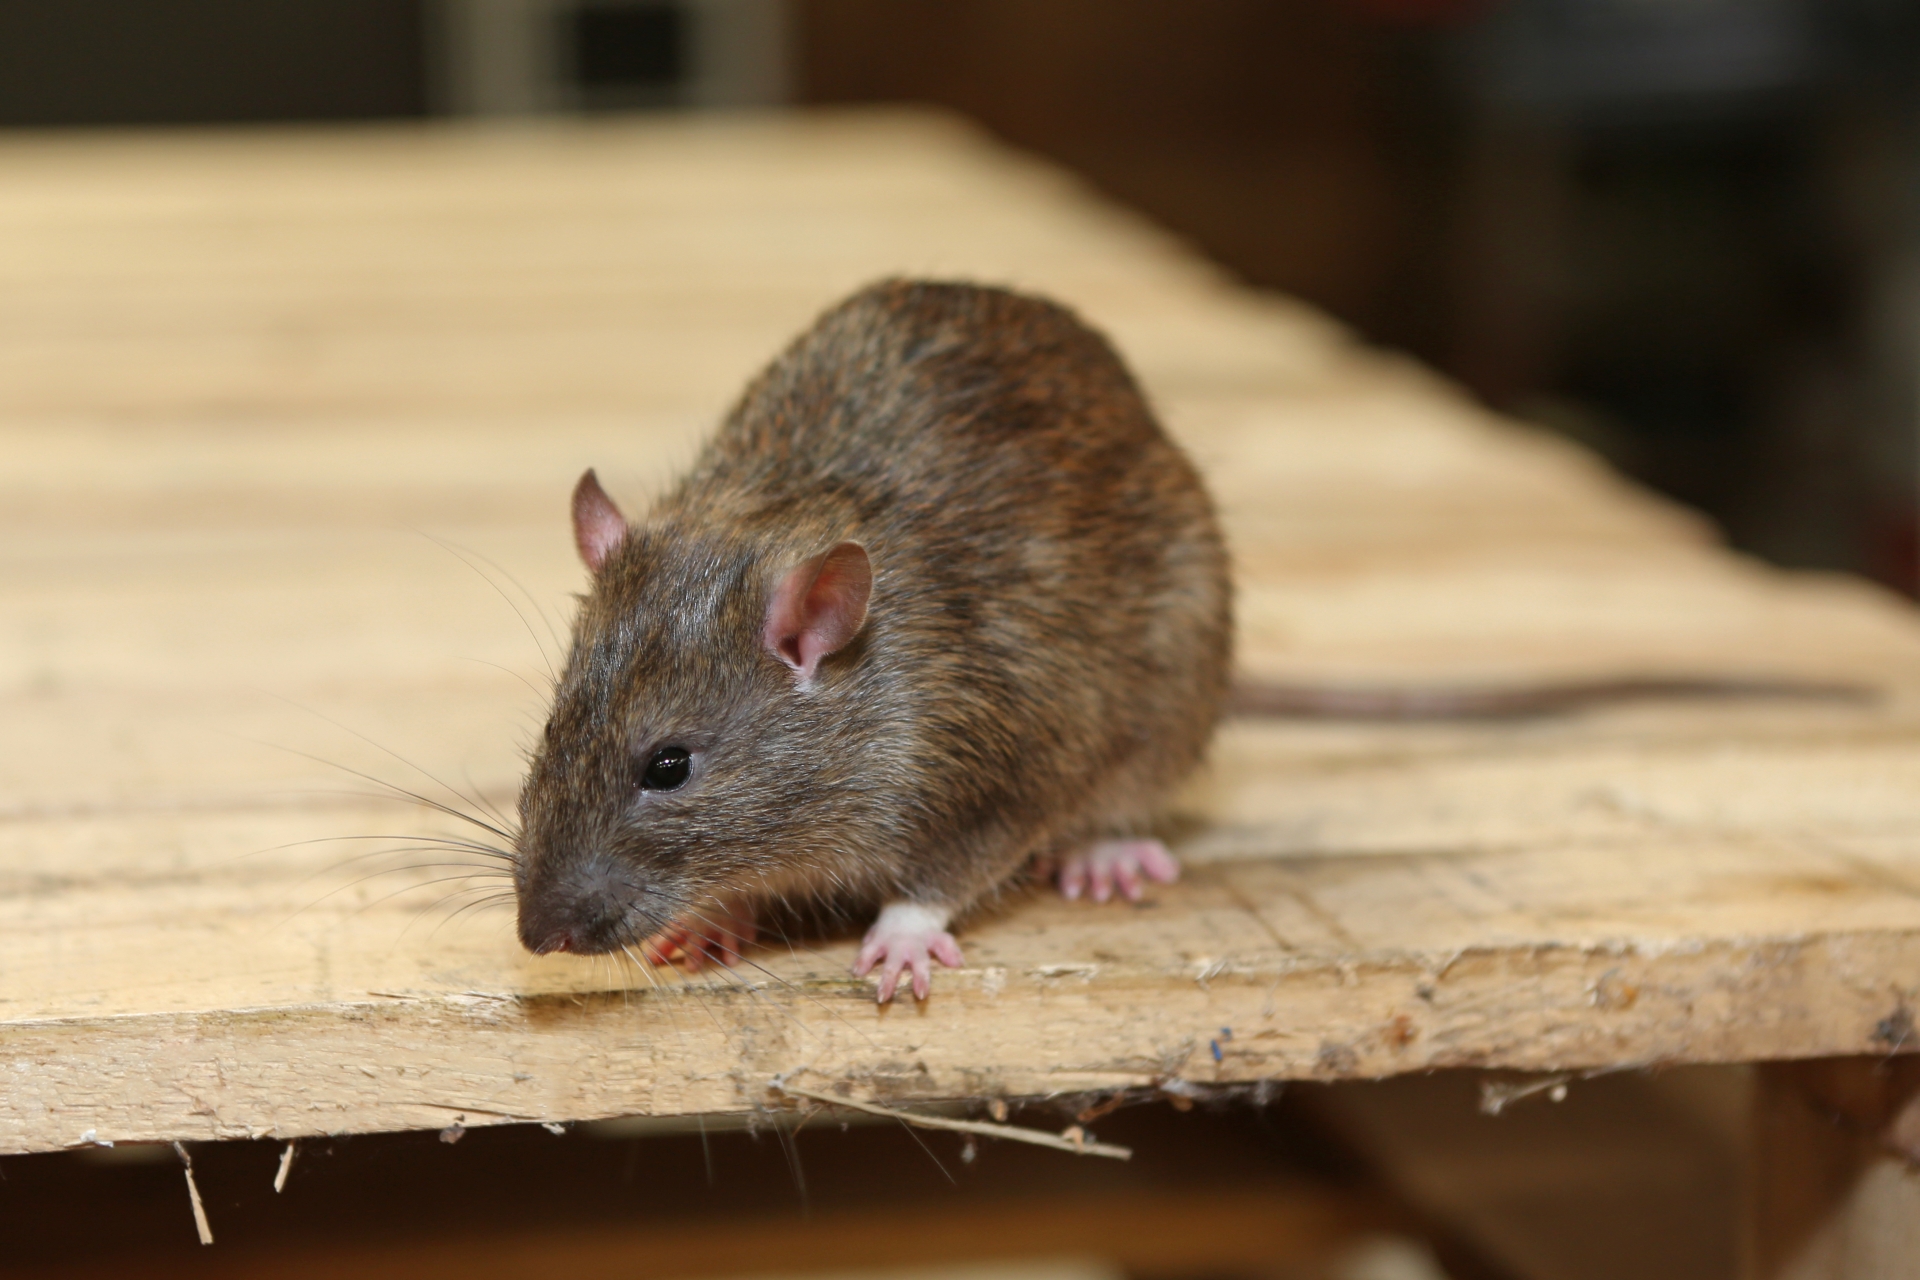 Rat extermination, Pest Control in East Sheen, SW14. Call Now 020 8166 9746